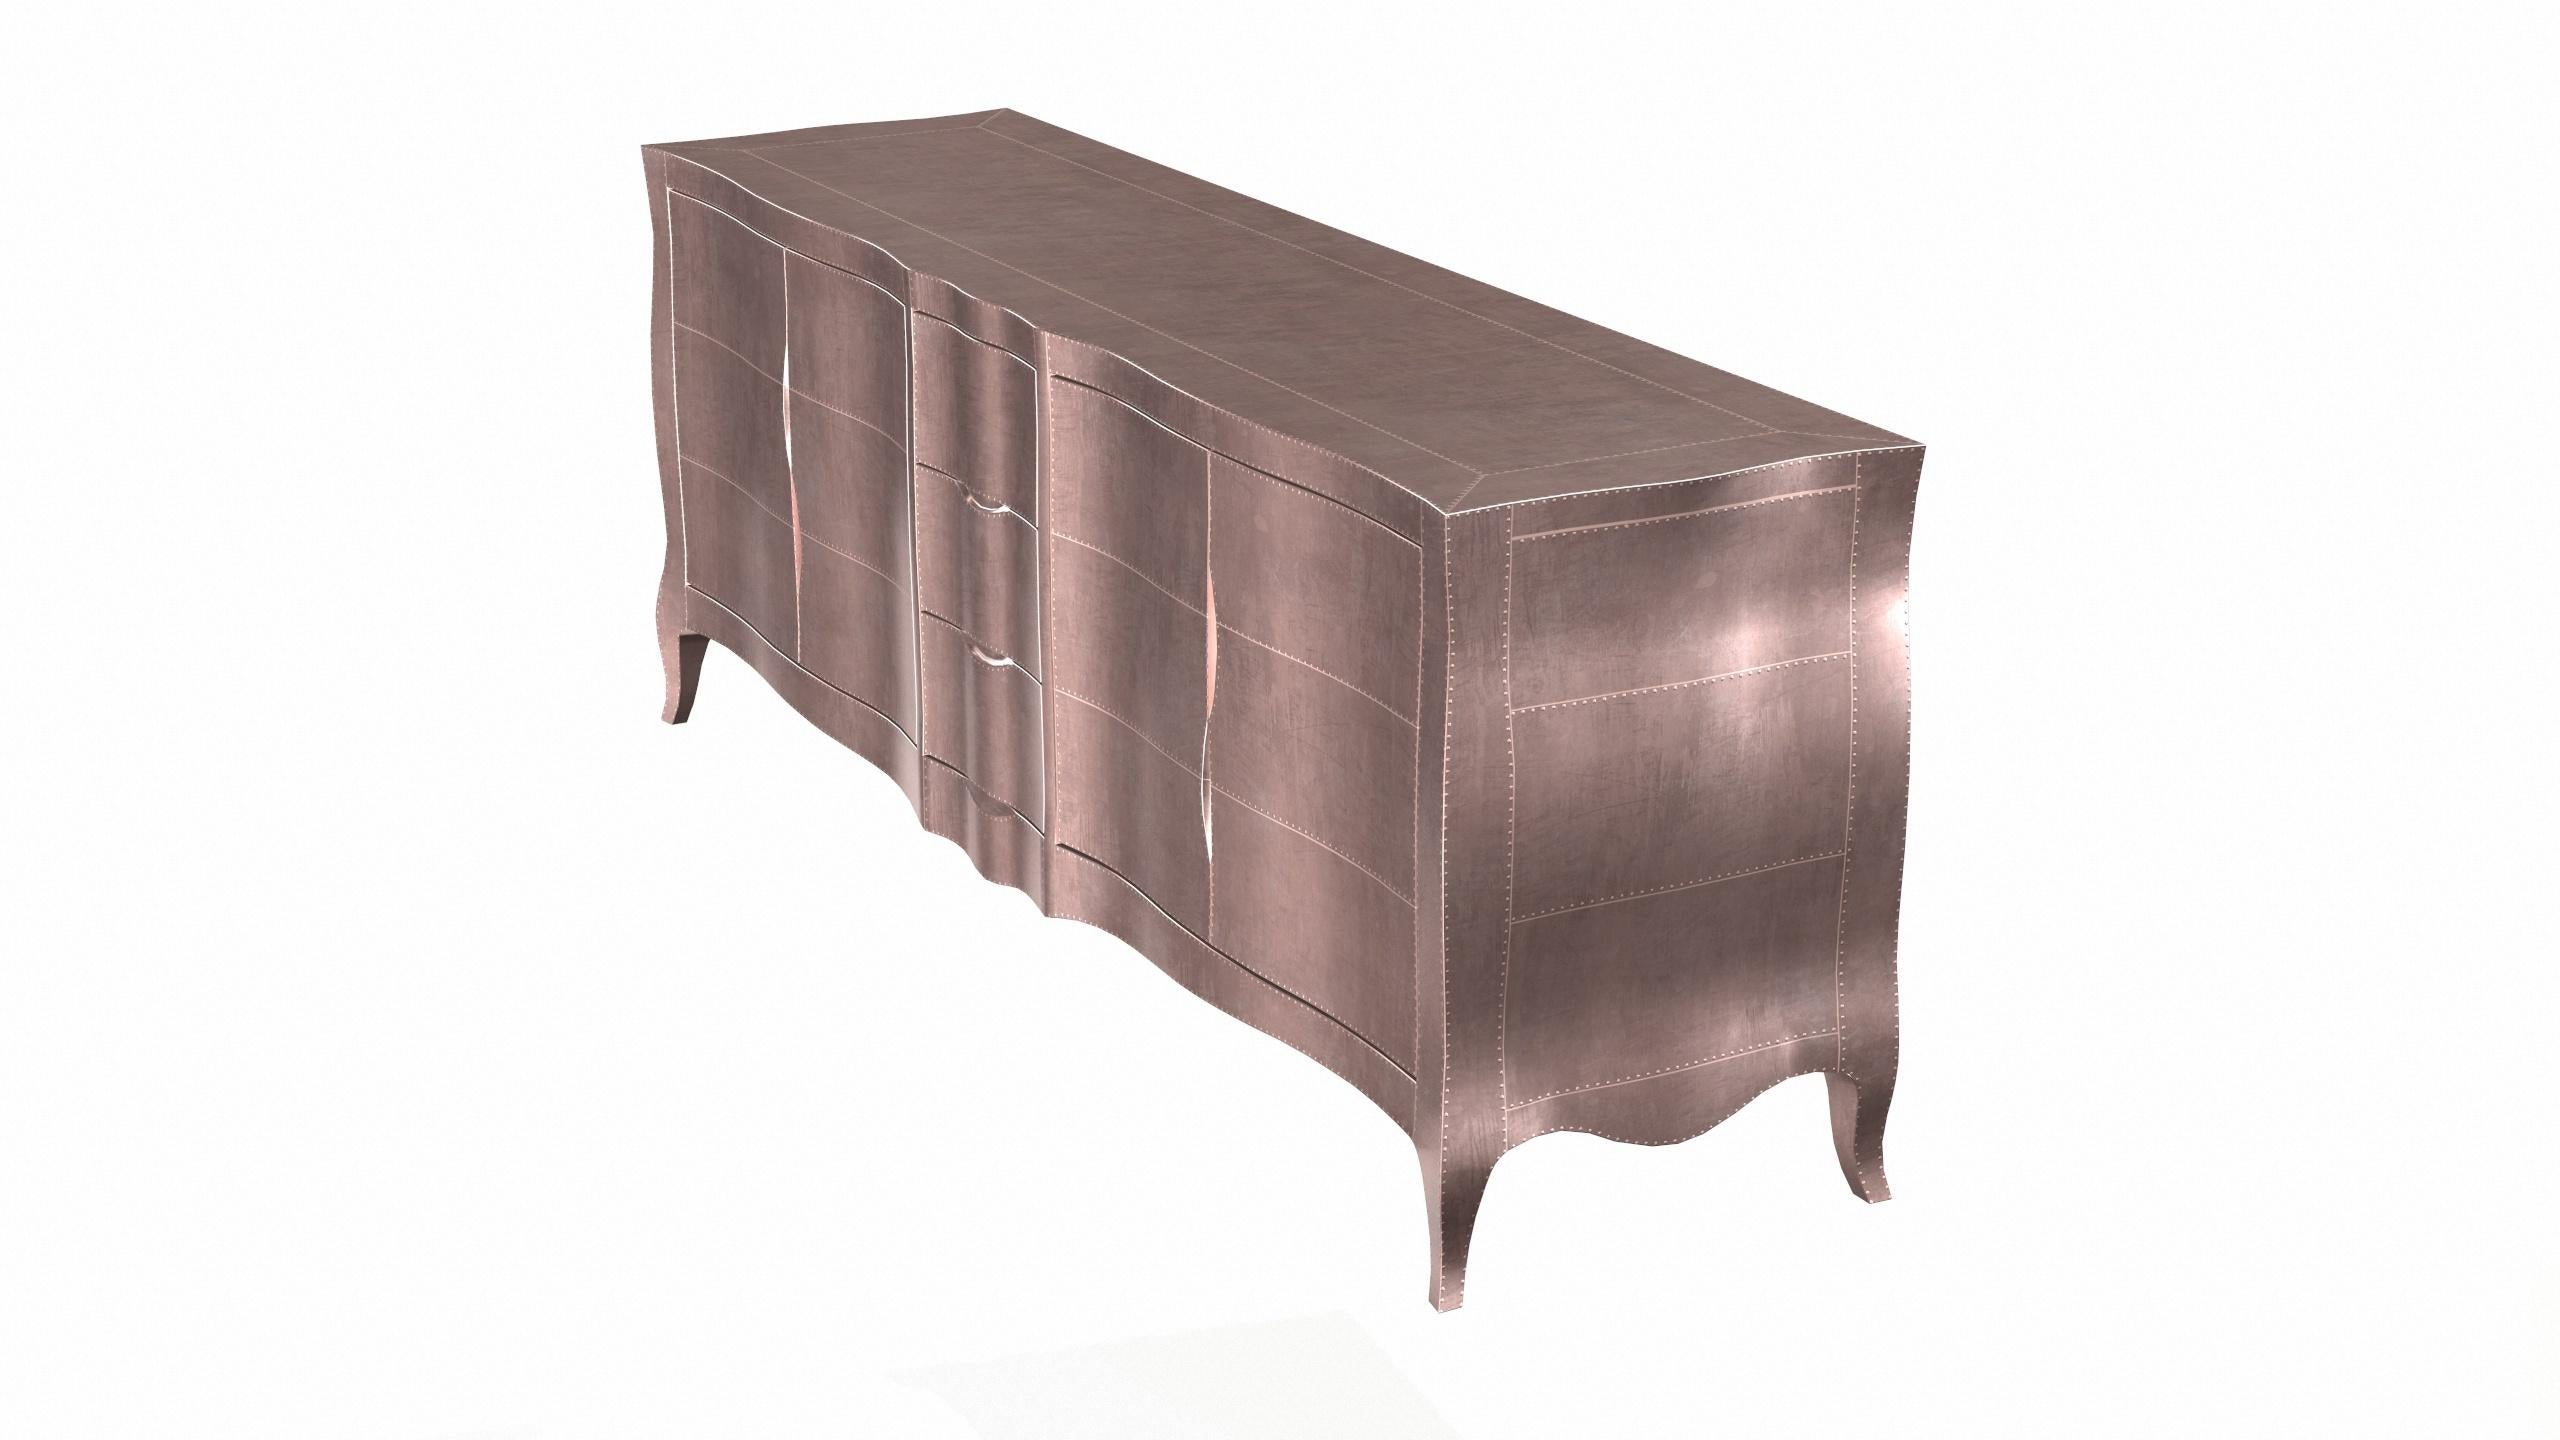 Hand-Carved Louise Credenza Art Deco Cabinets in Smooth Copper by Paul Mathieu for S Odegard For Sale